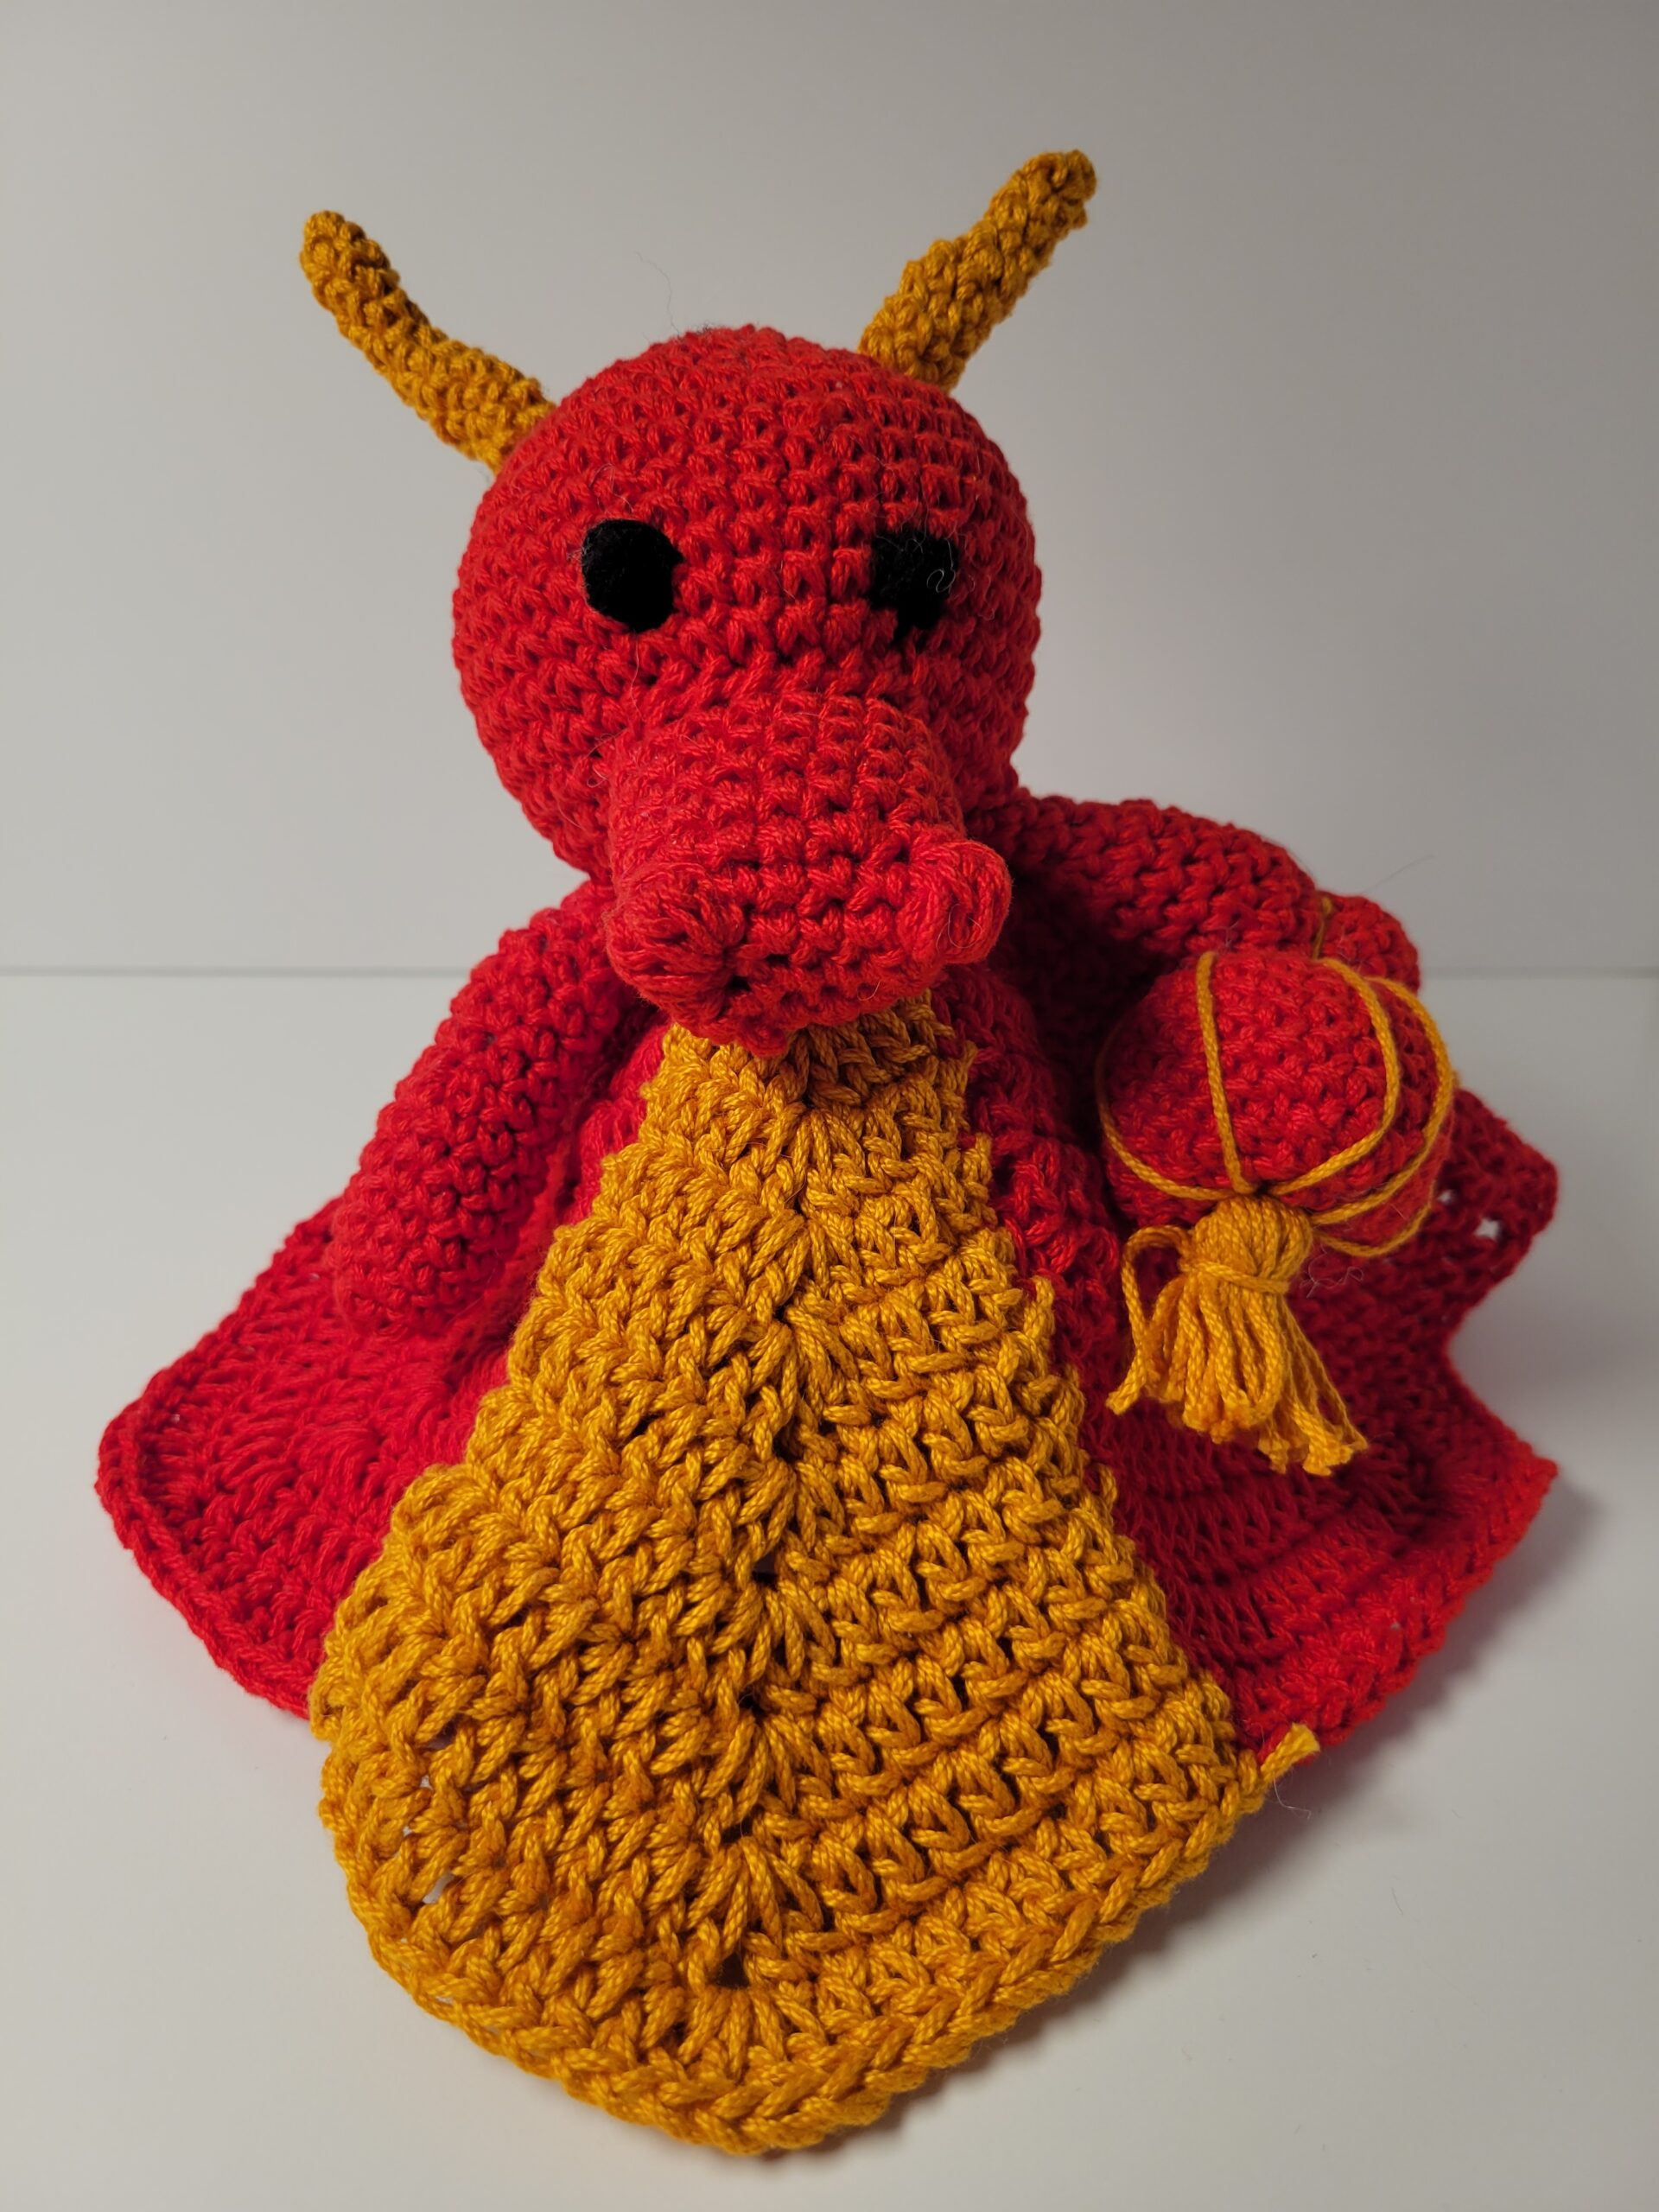 How to Crochet: Year of the Dragon Lovey